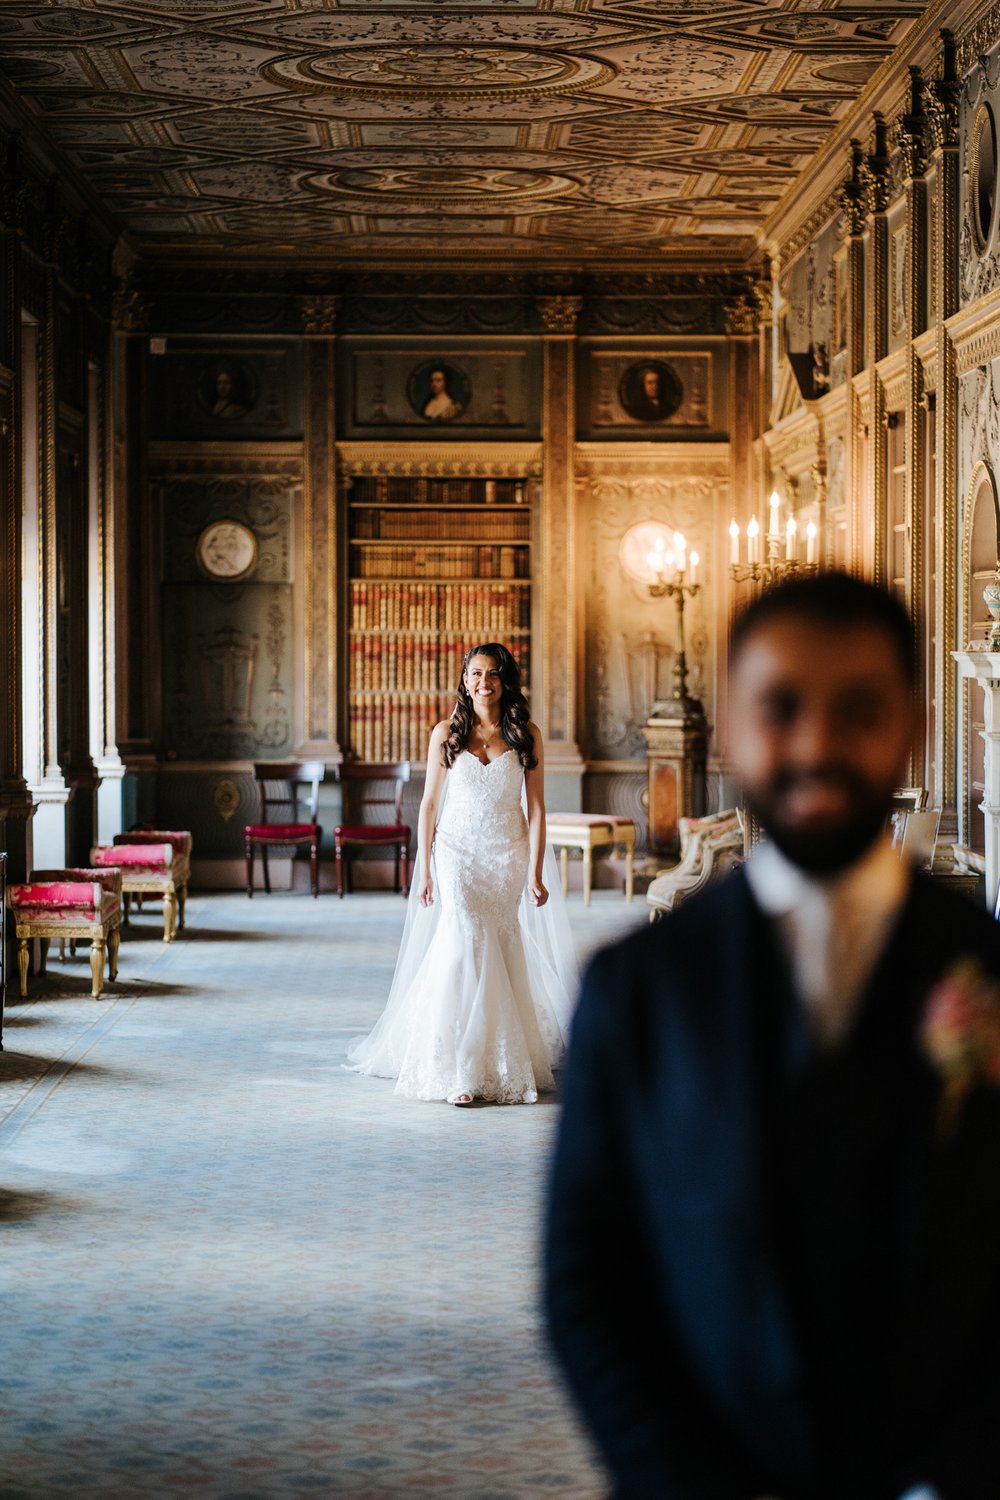 Bride, in beautiful white dress, walks up to groom in Long Gallery at Syon Park wedding for first look